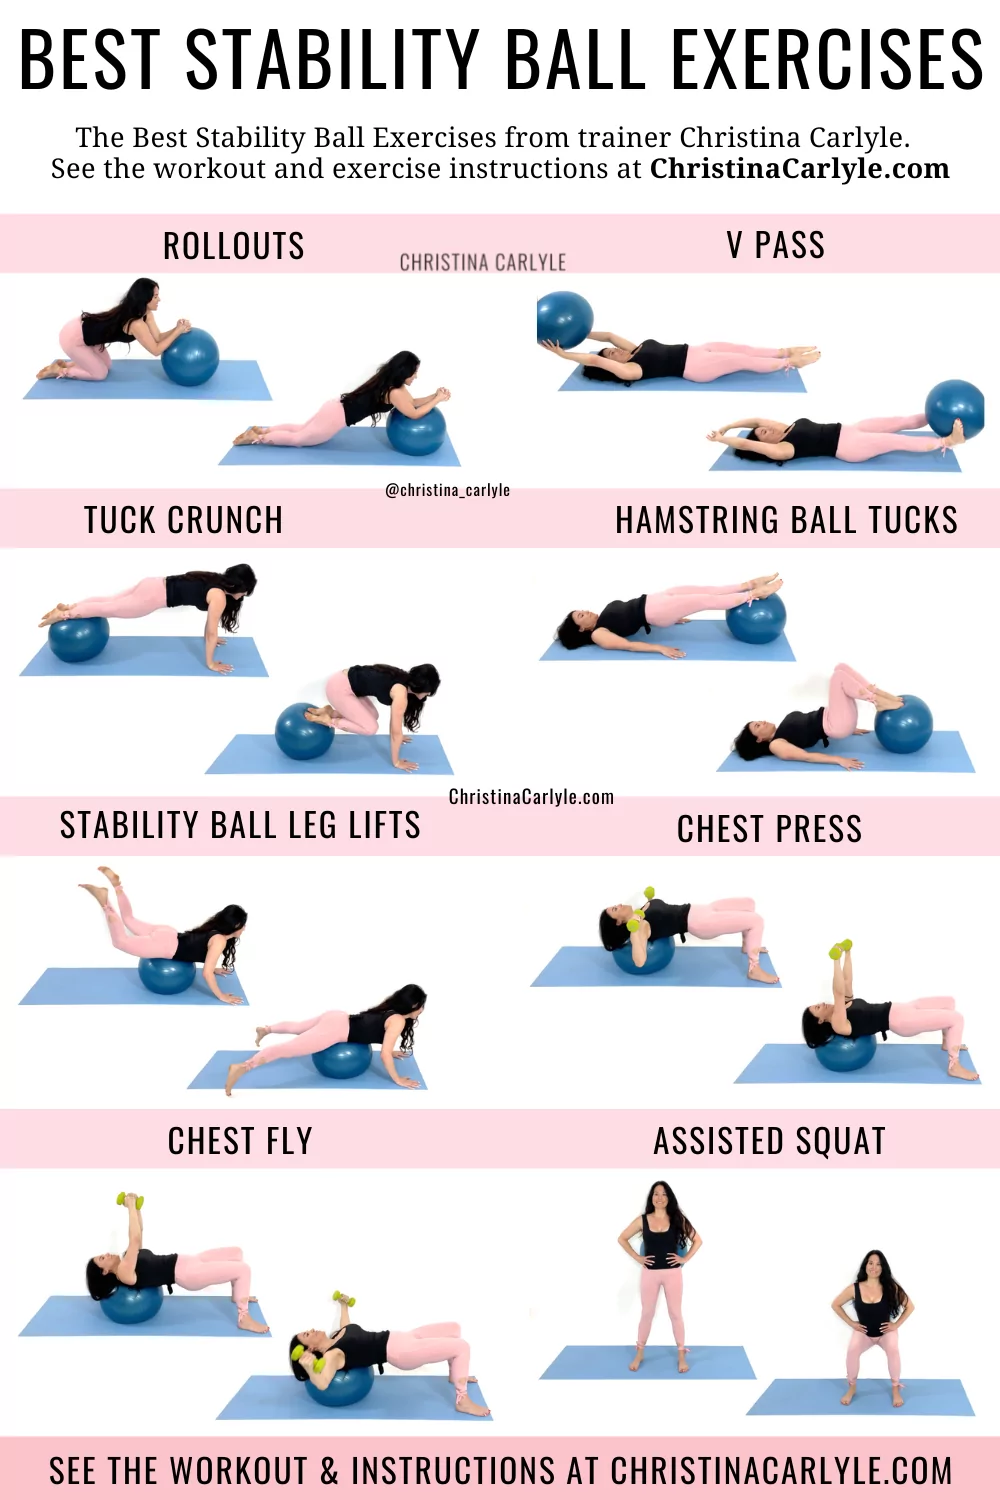 Total Body Exercise Ball Workout - Best Stability Ball Exercises